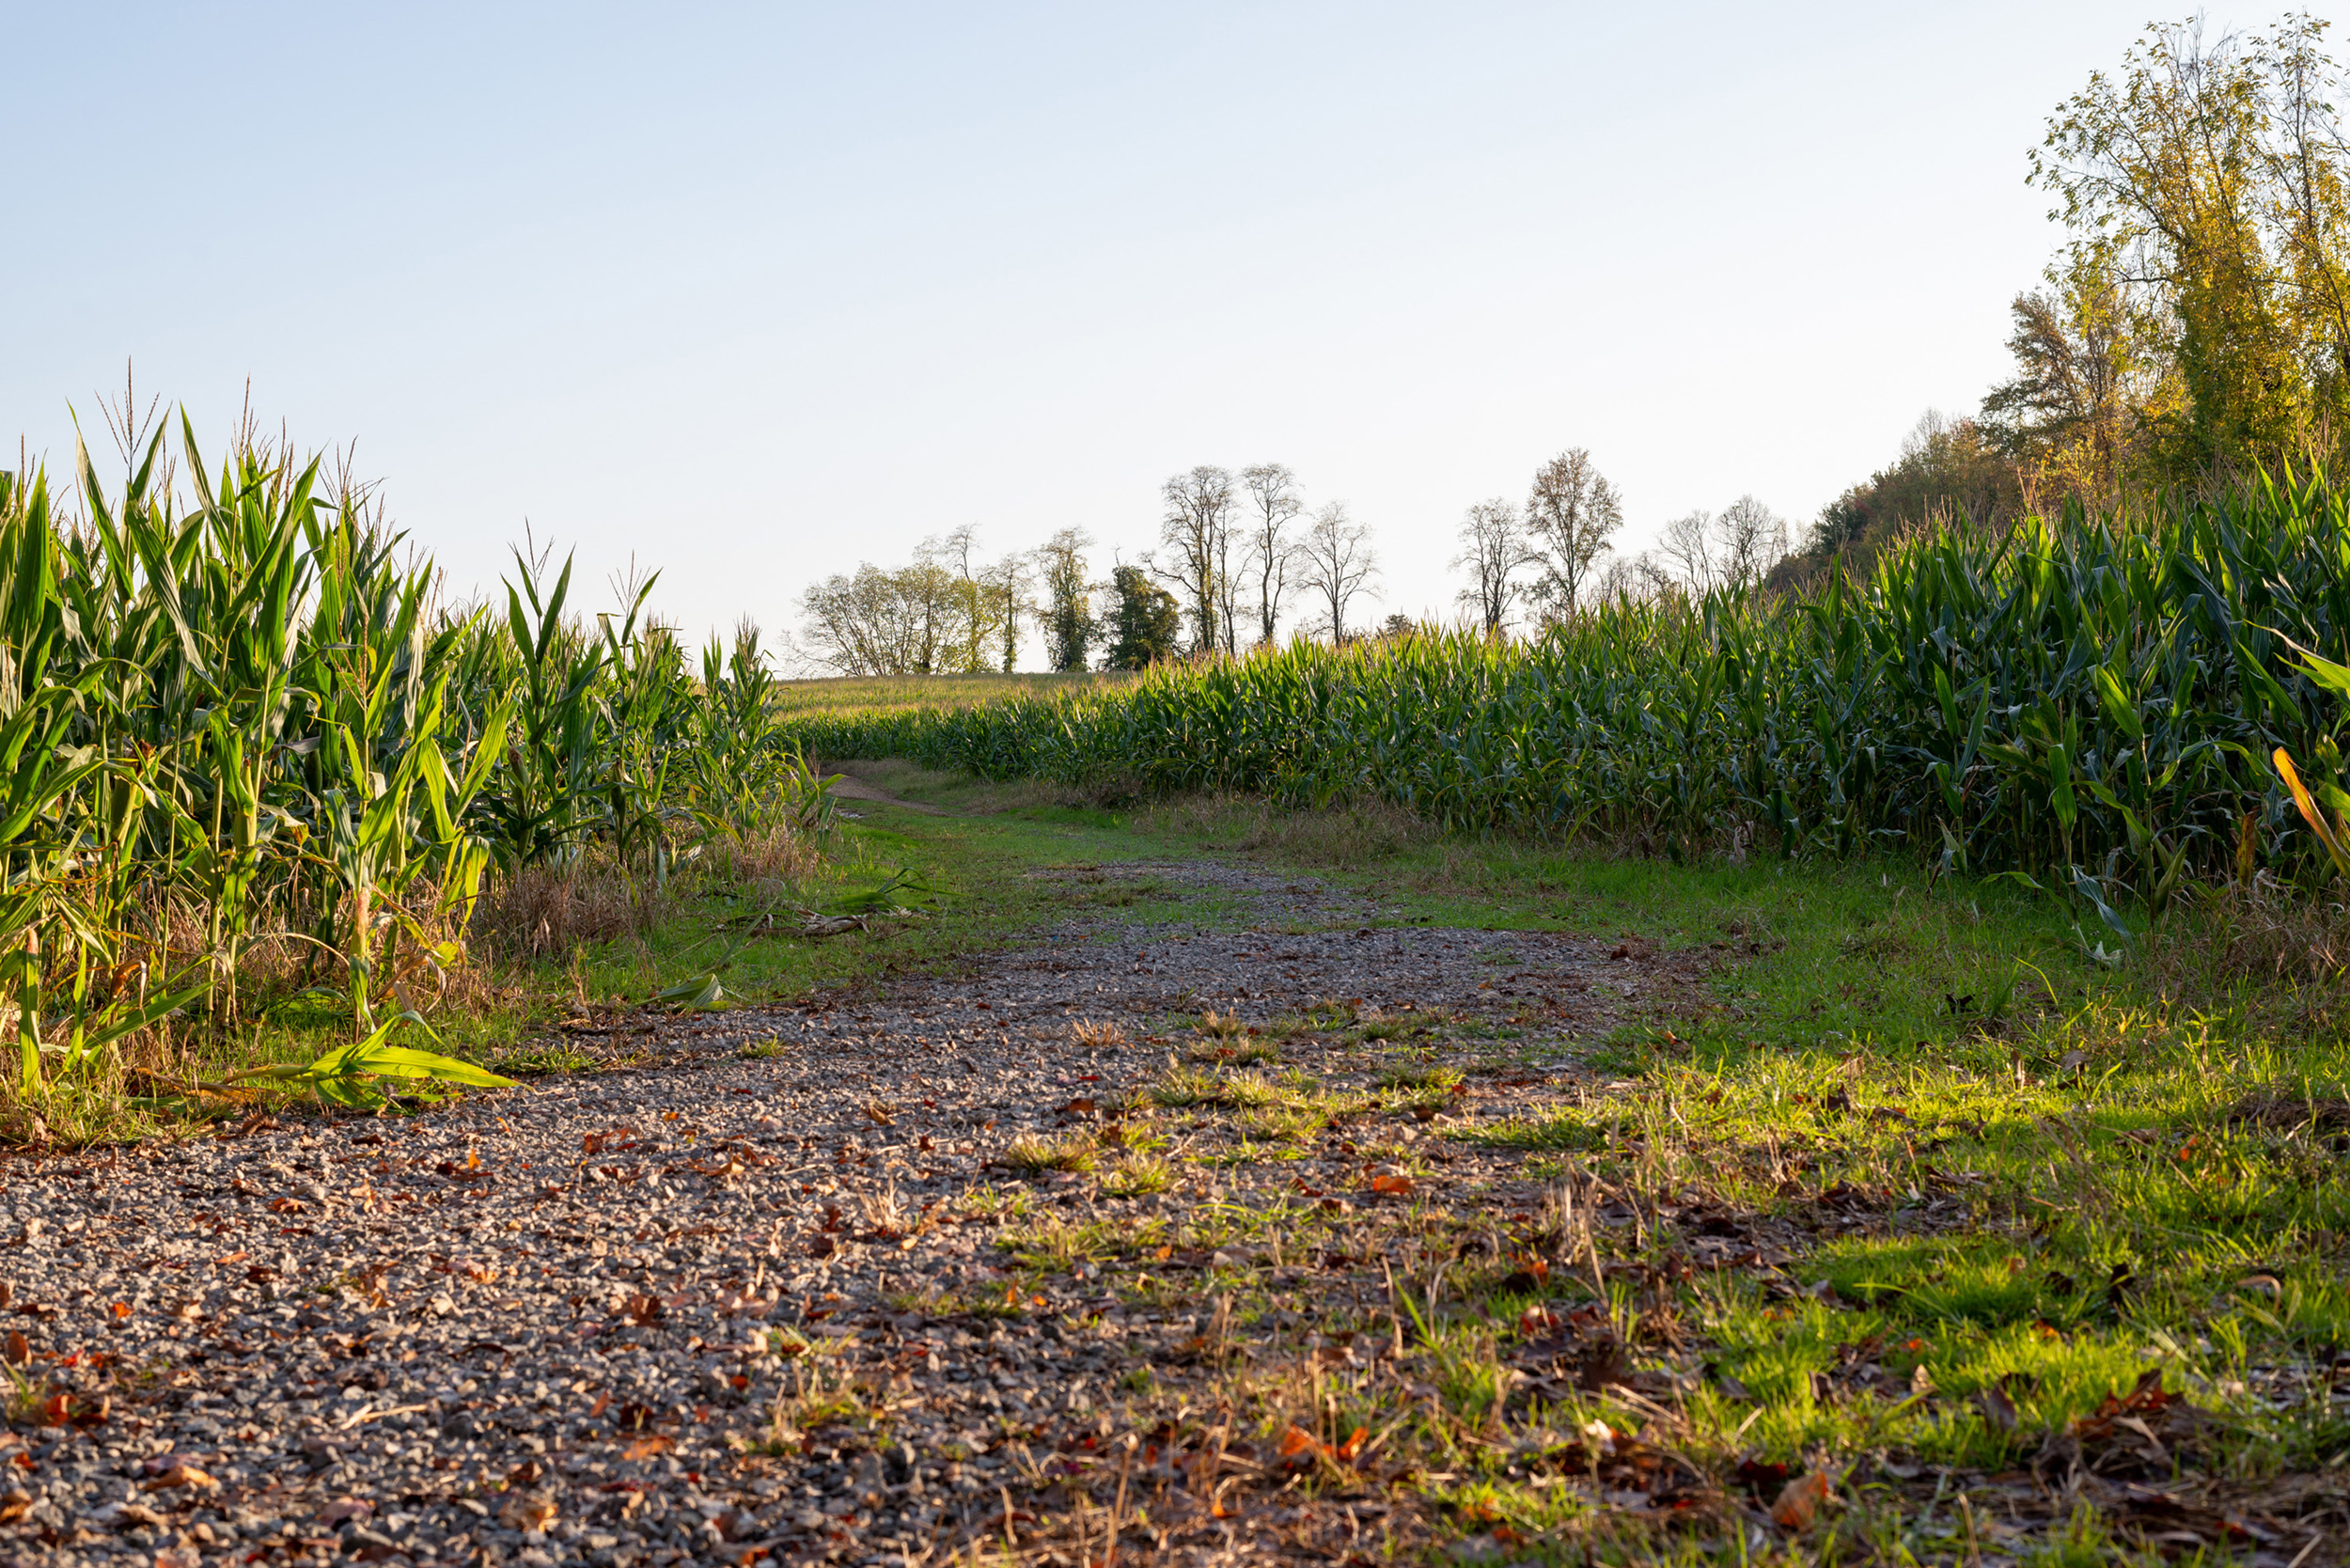 A wide dirt path surrounded by corn fields with sunset lighting.